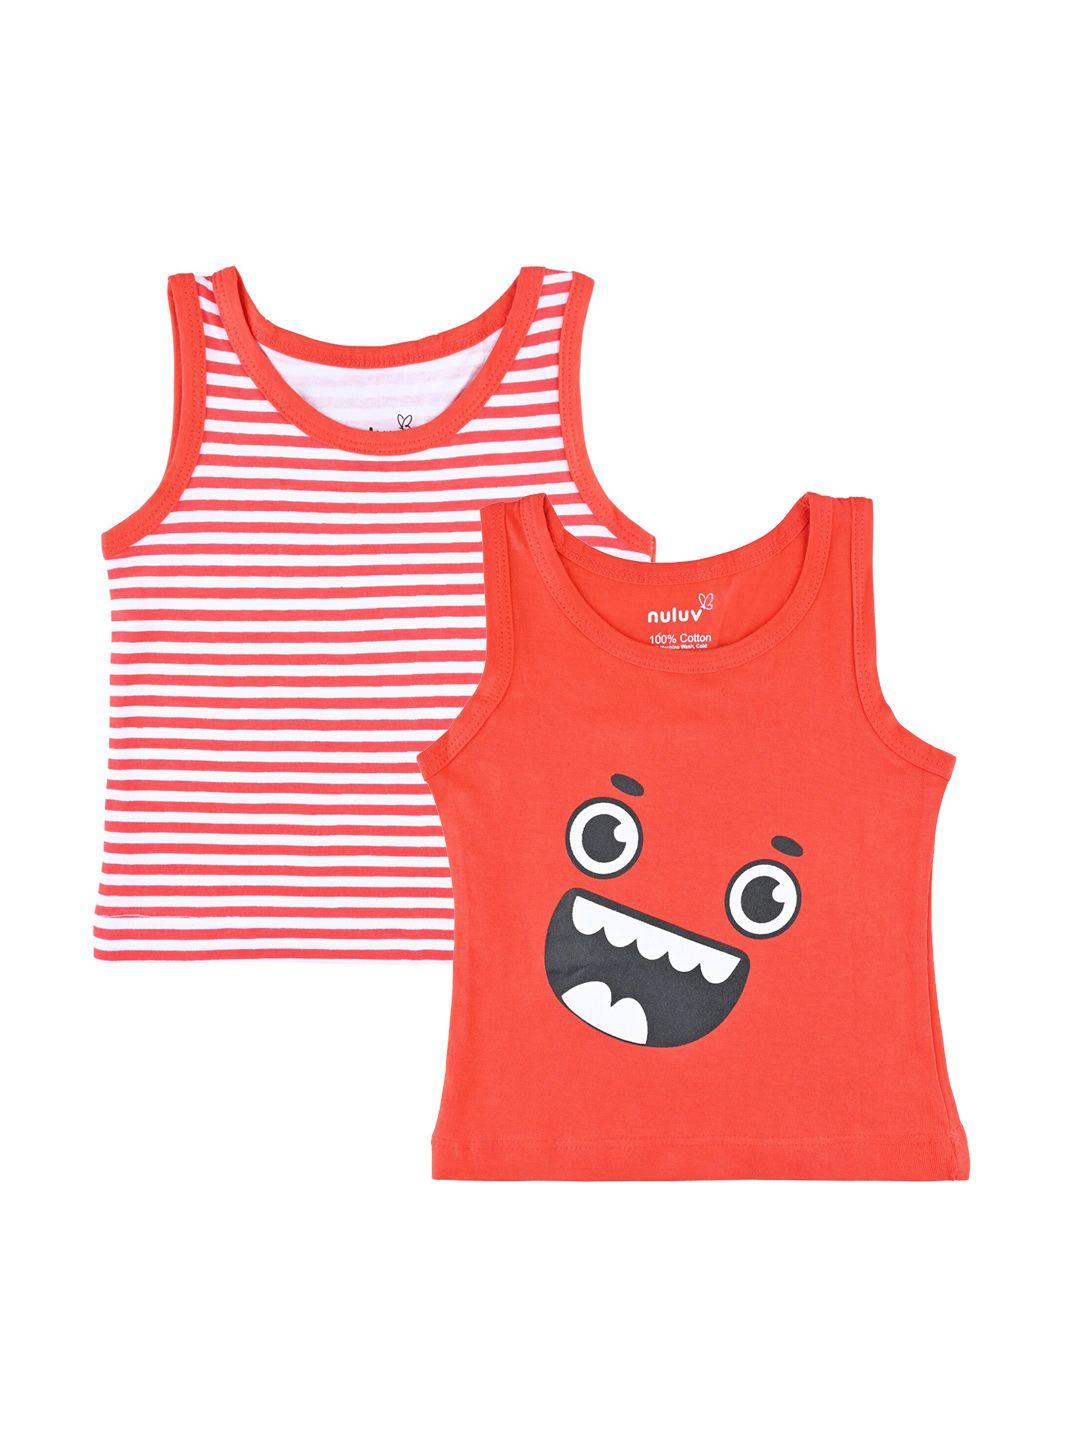 Nuluv Boys Pack of 2 Red & White Printed Cotton Innerwear Vests